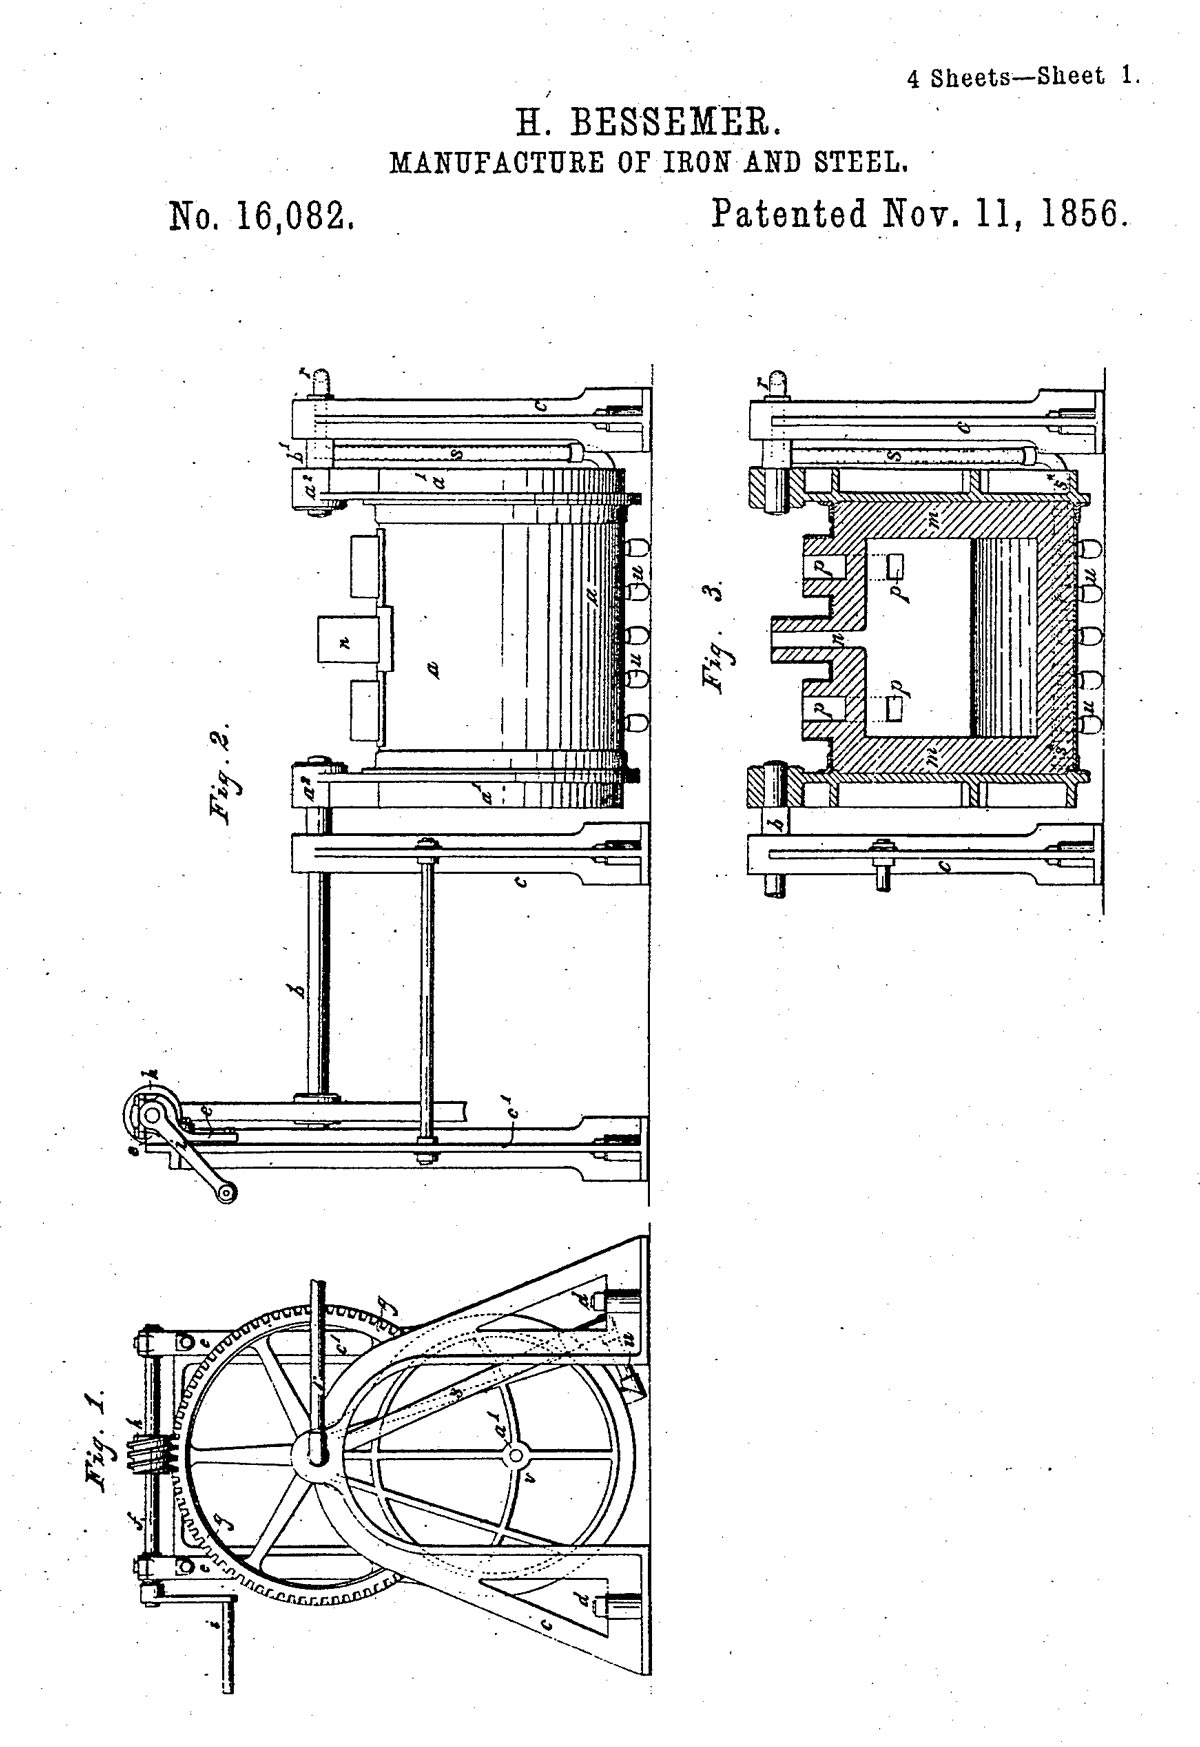 Henry Bessemer of London, England – US Patent #16,082, Nov. 11, 1856 “Manufacture of Iron and Steel”